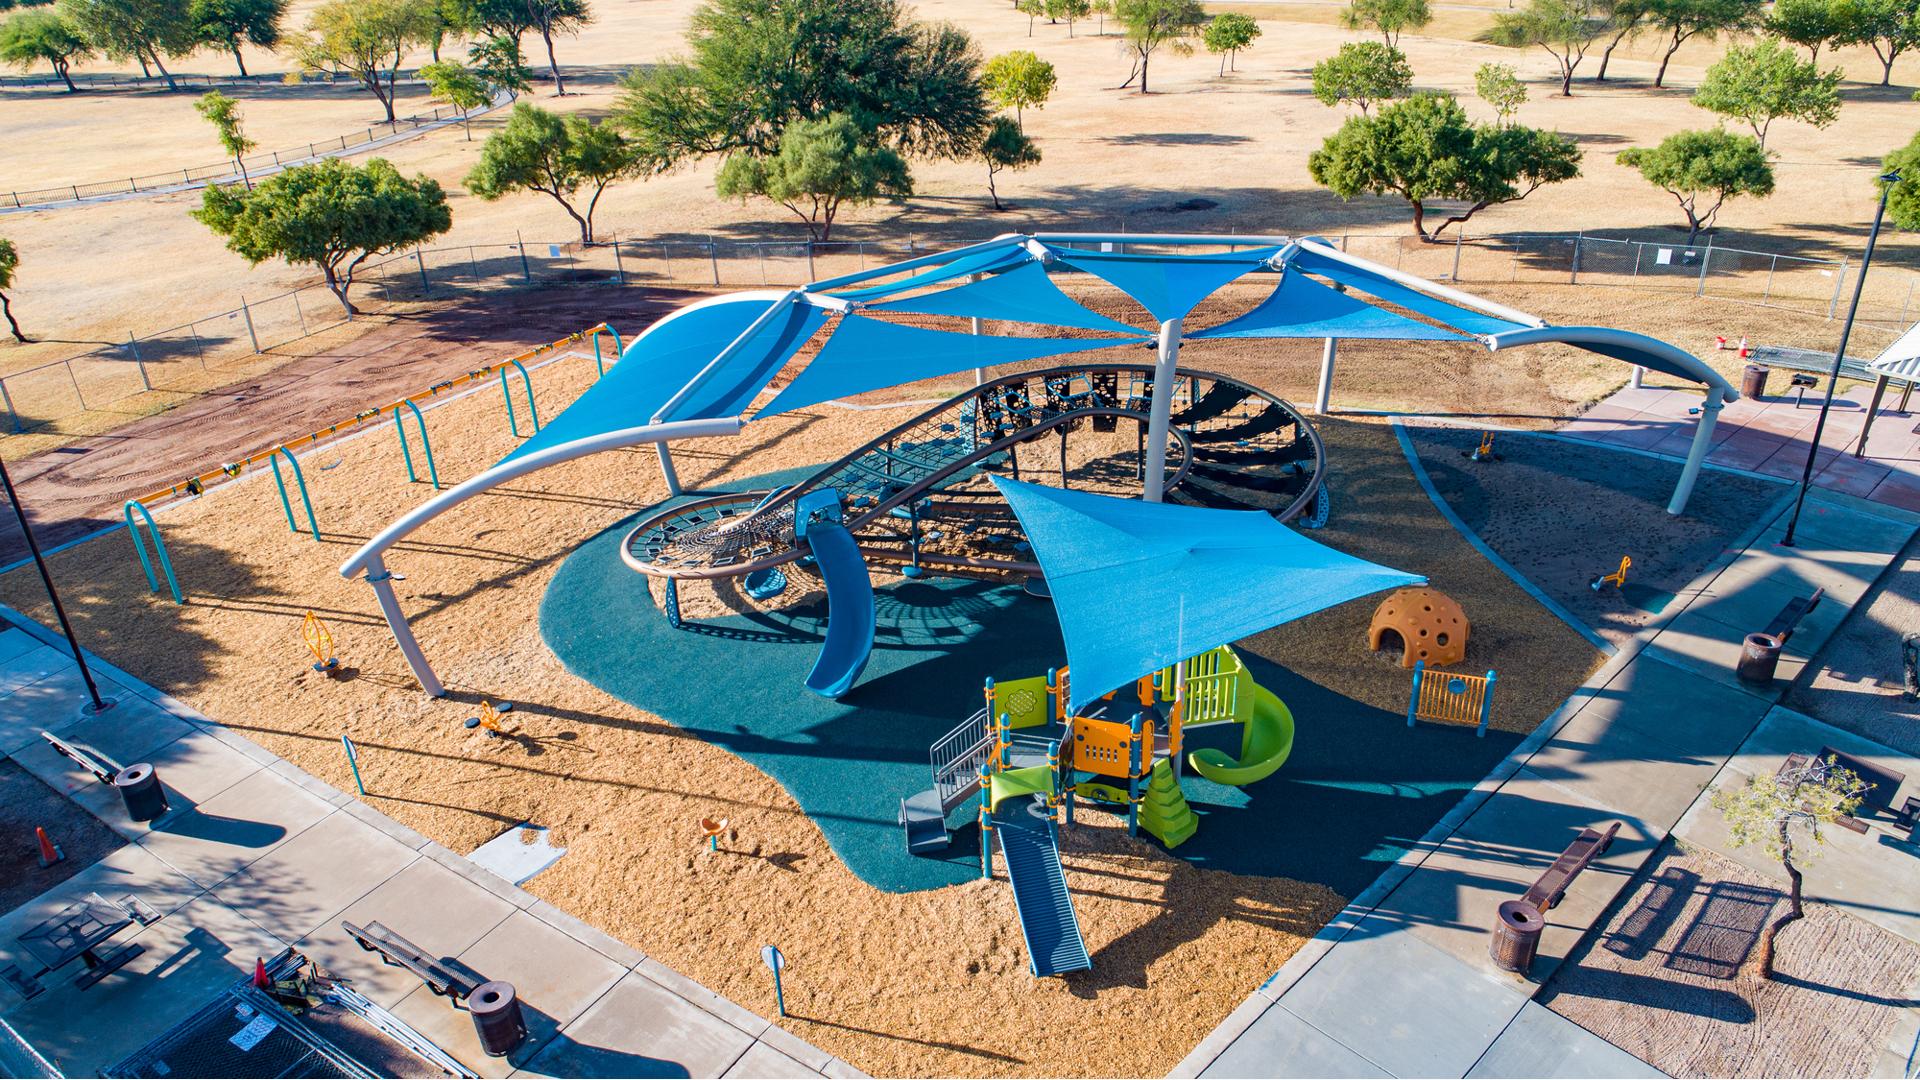 A custom blue shade structure covers a figured eight shaped play structure made up of cargo nets and belt climbers. A second playground structure with shade sits near the figure eight shaped play structure.